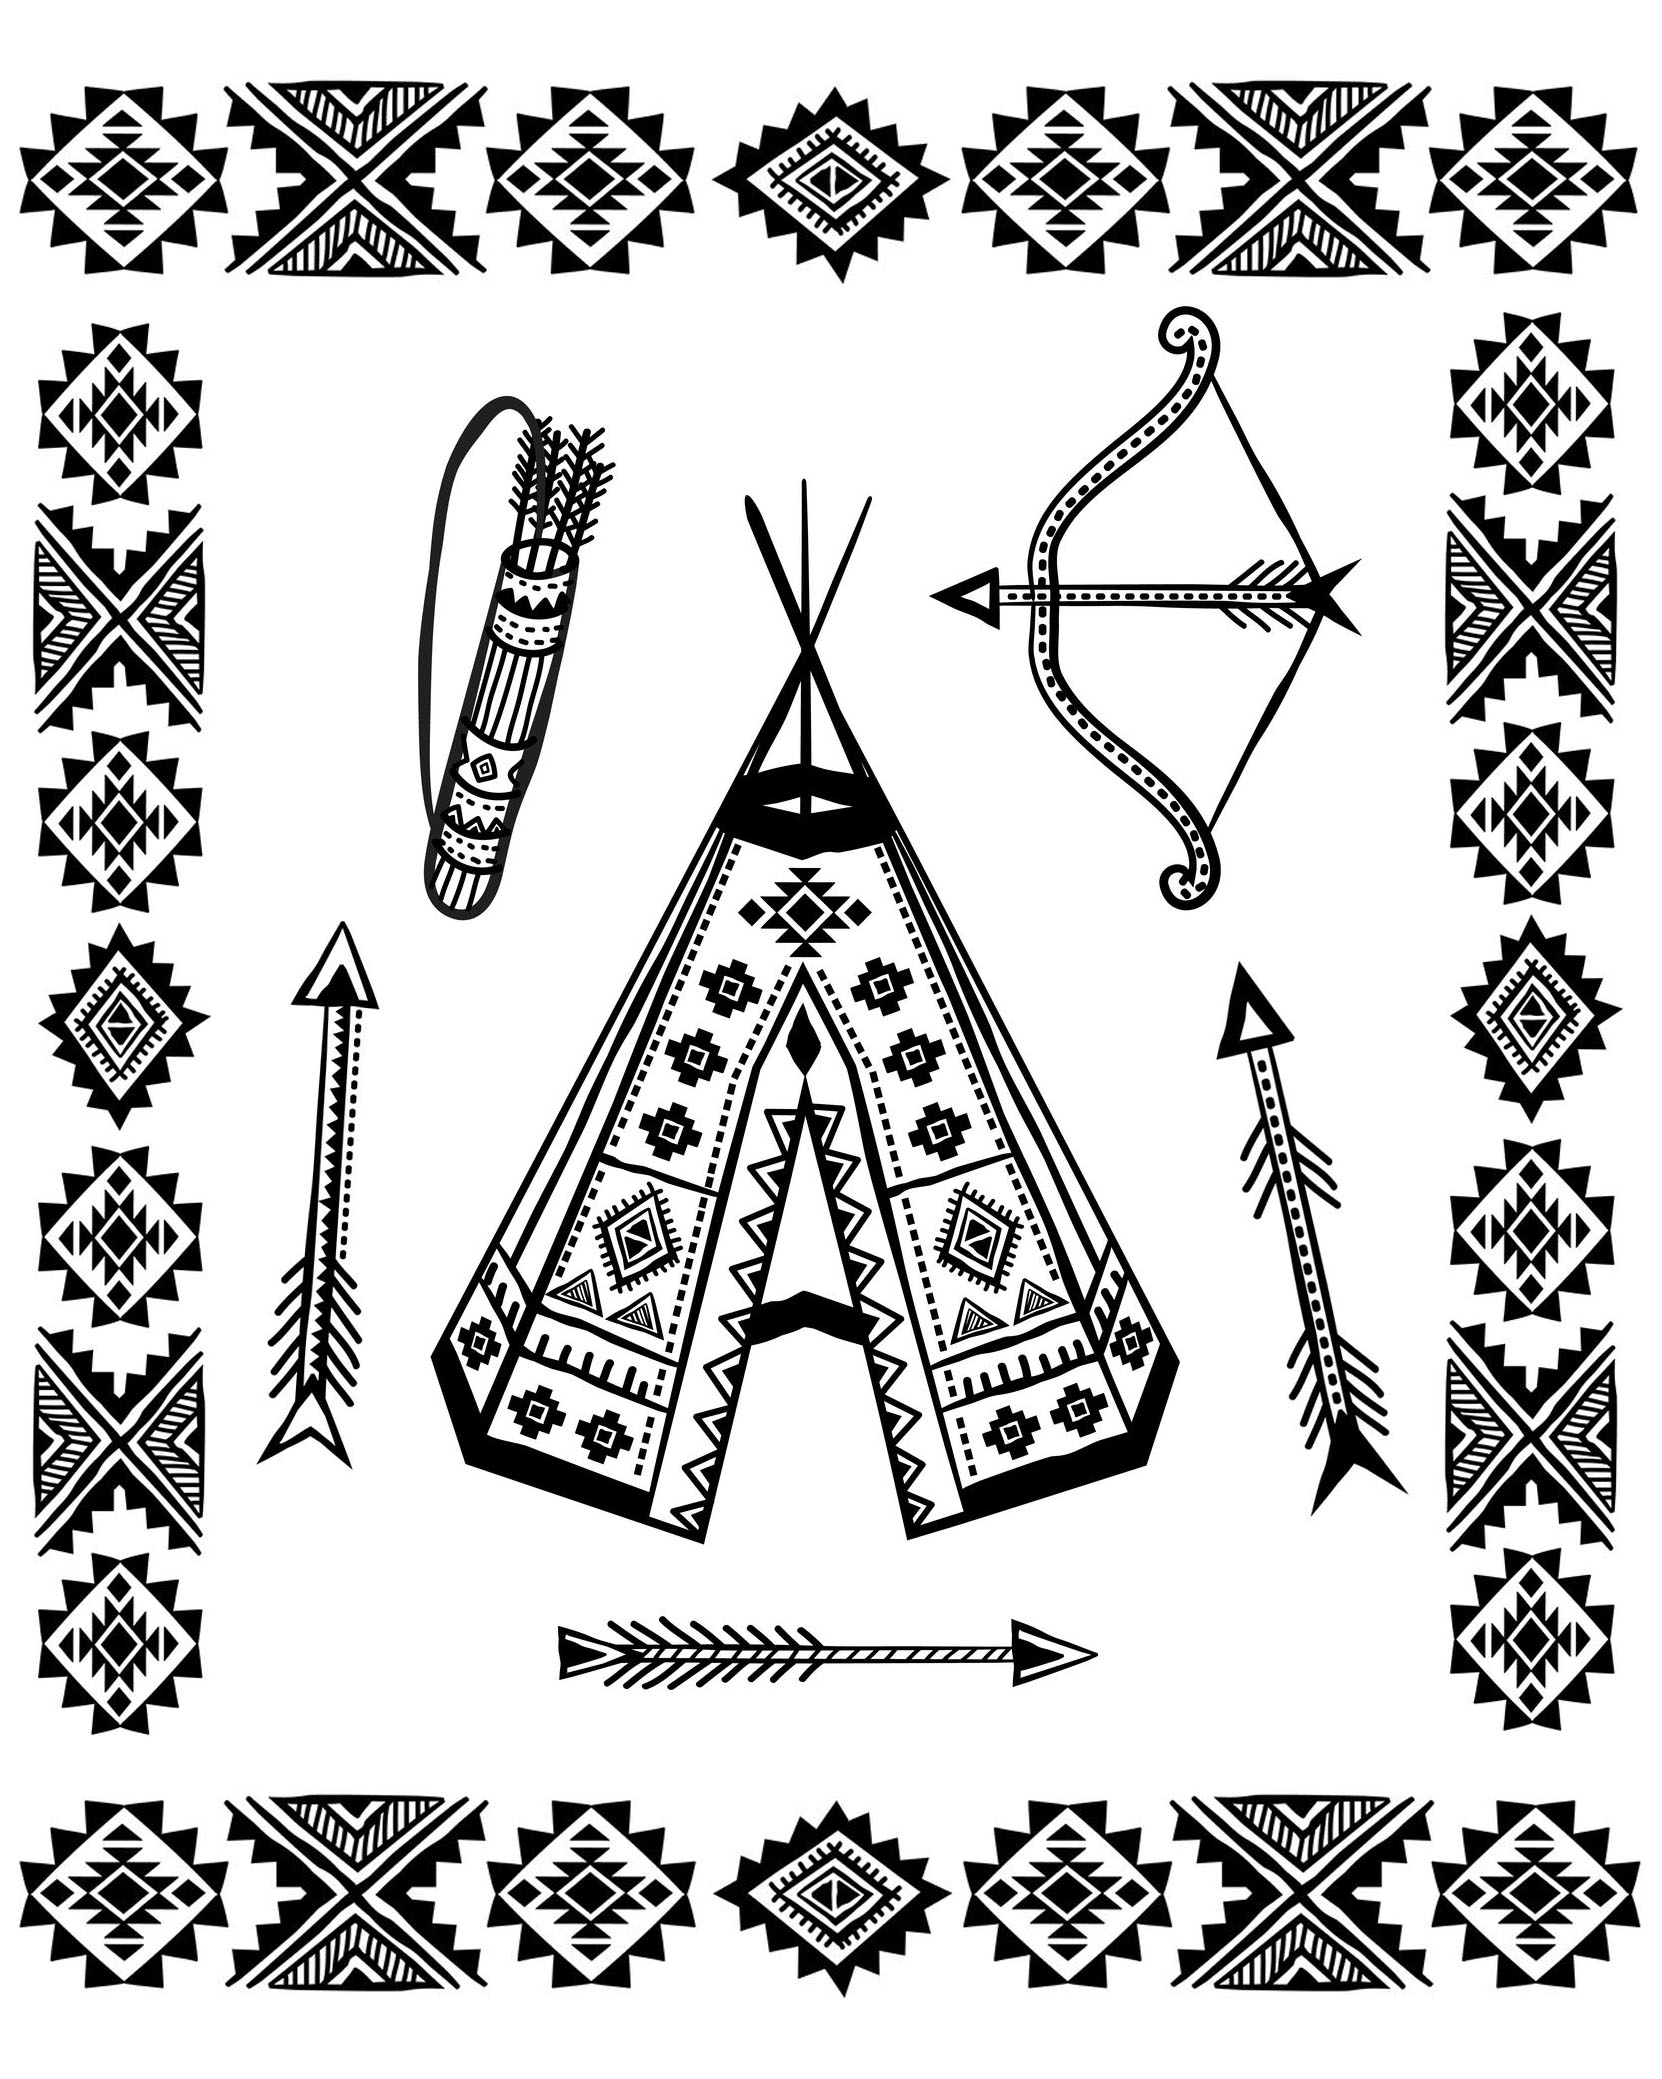 Coloring page with a Tipi and other symbols